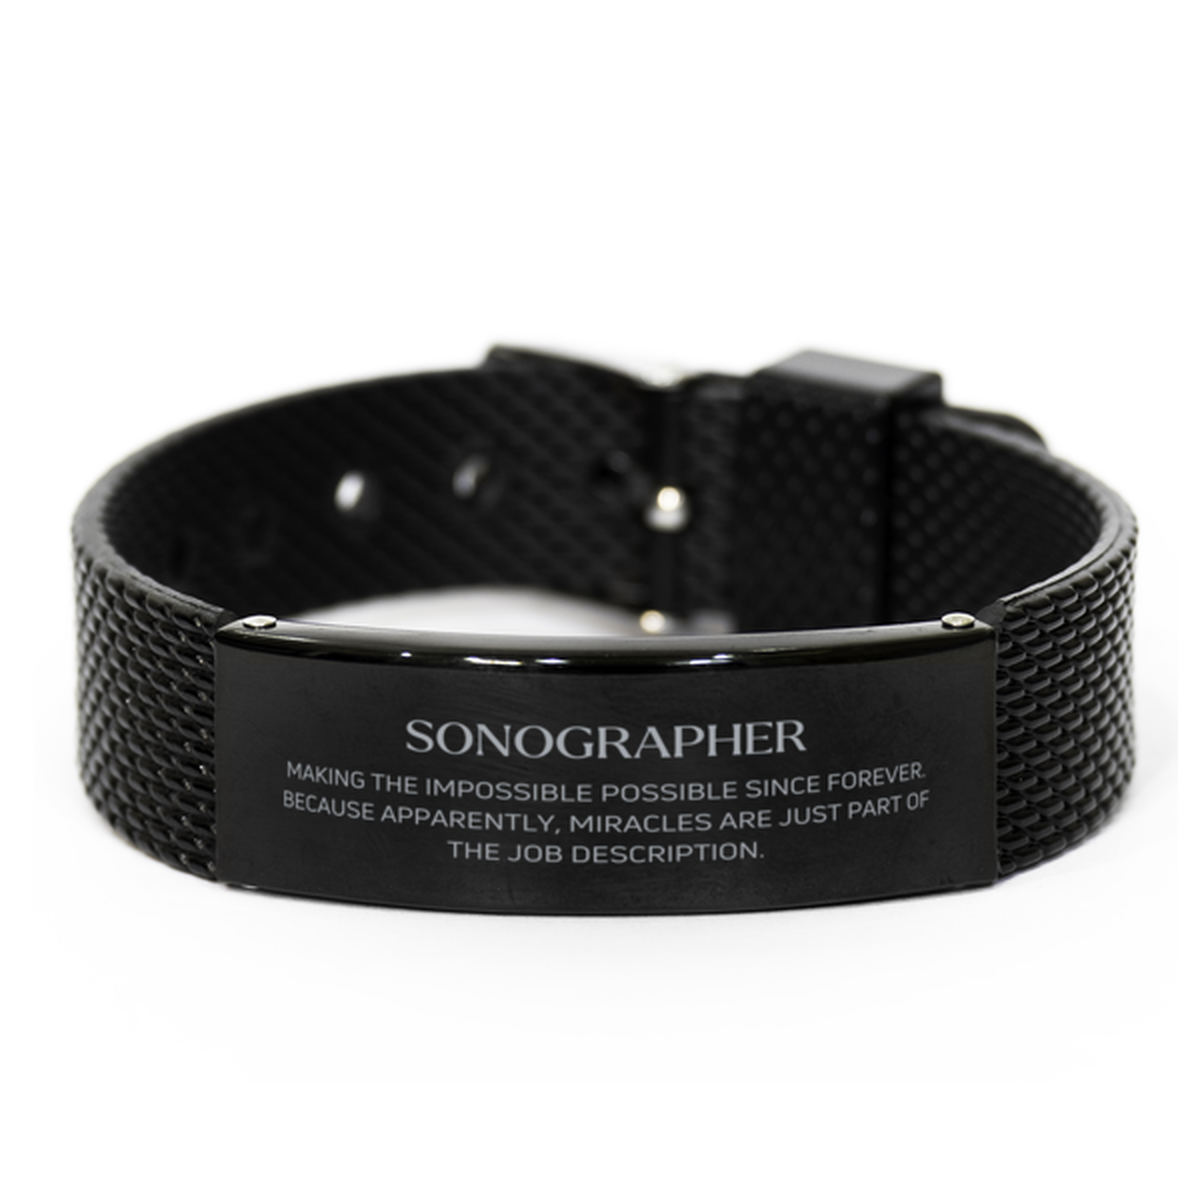 Funny Sonographer Gifts, Miracles are just part of the job description, Inspirational Birthday Black Shark Mesh Bracelet For Sonographer, Men, Women, Coworkers, Friends, Boss